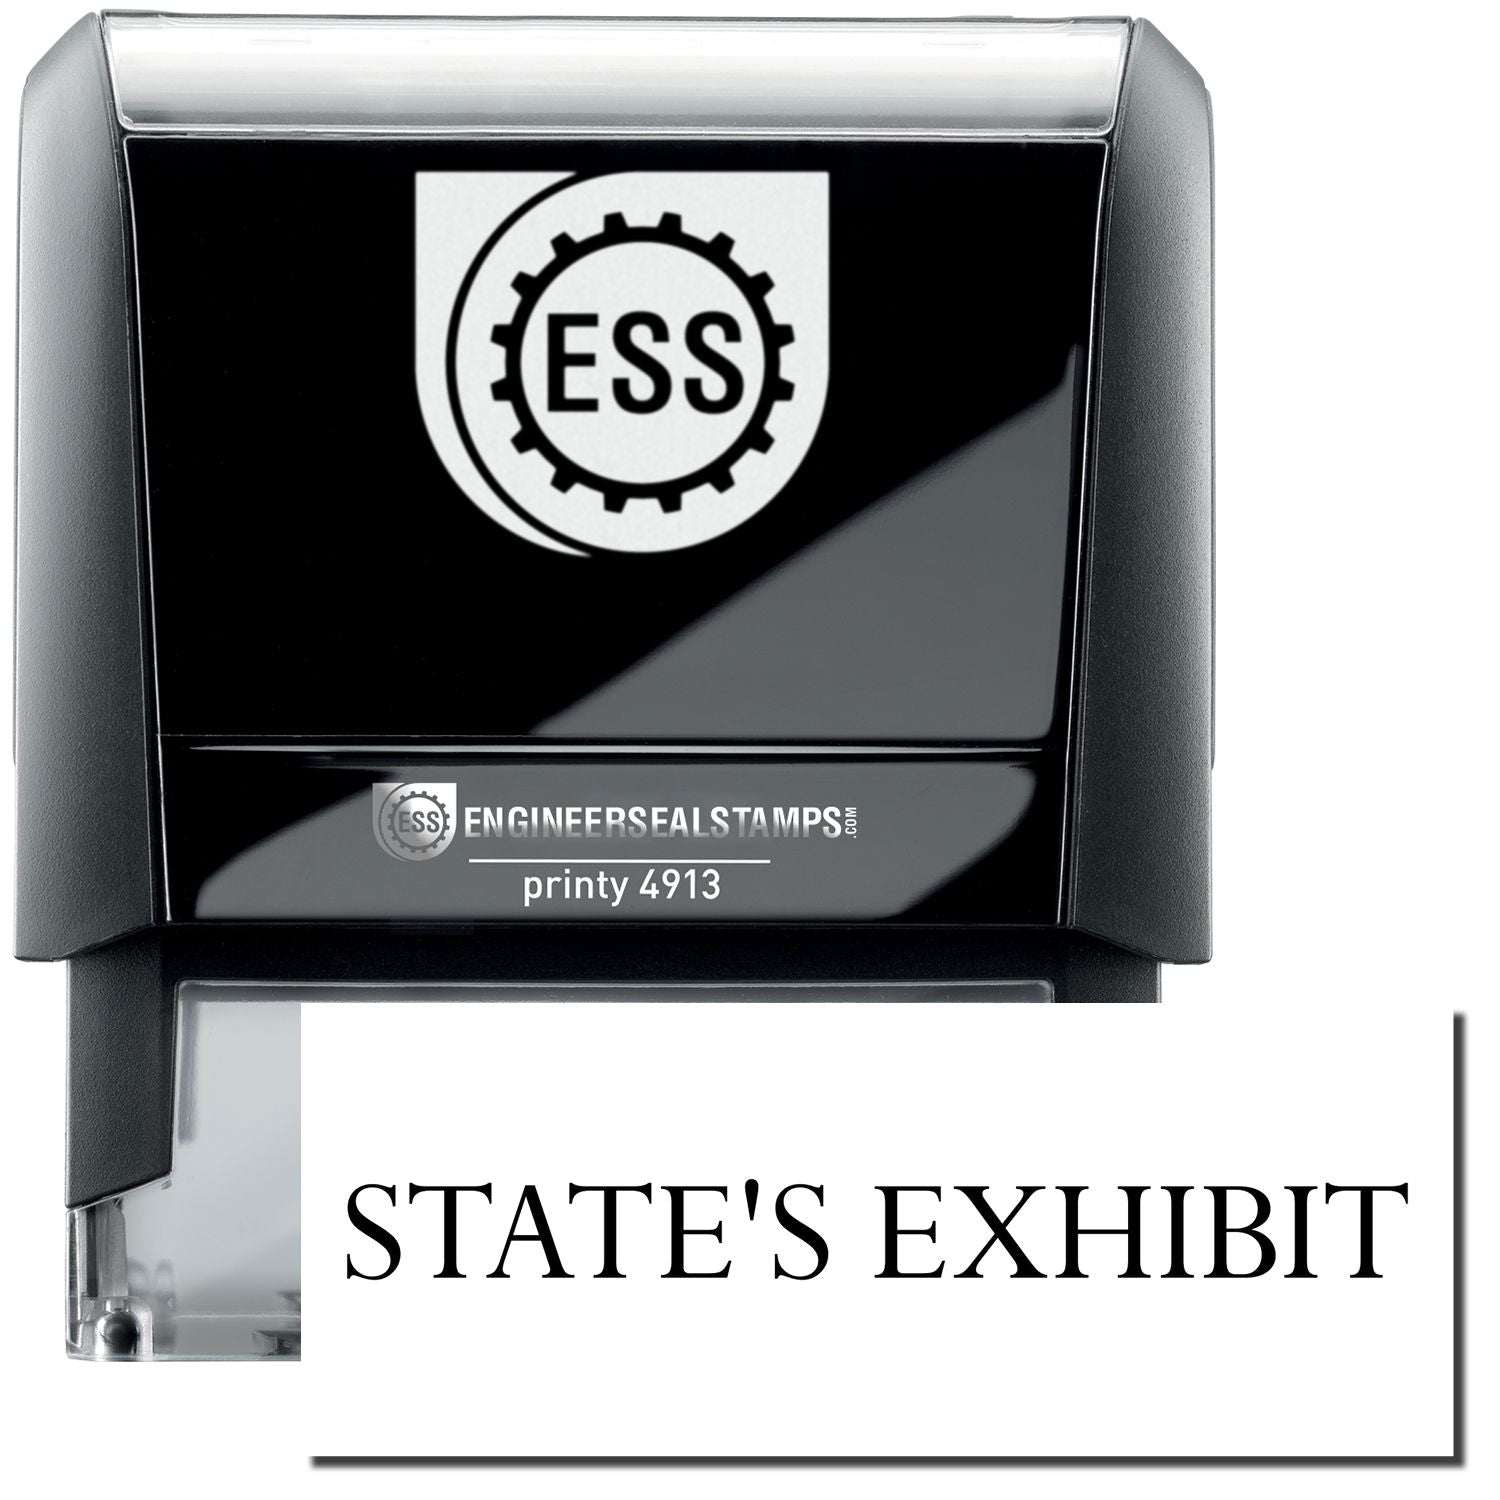 A self-inking stamp with a stamped image showing how the text "STATE'S EXHIBIT" in a large bold font is displayed by it.